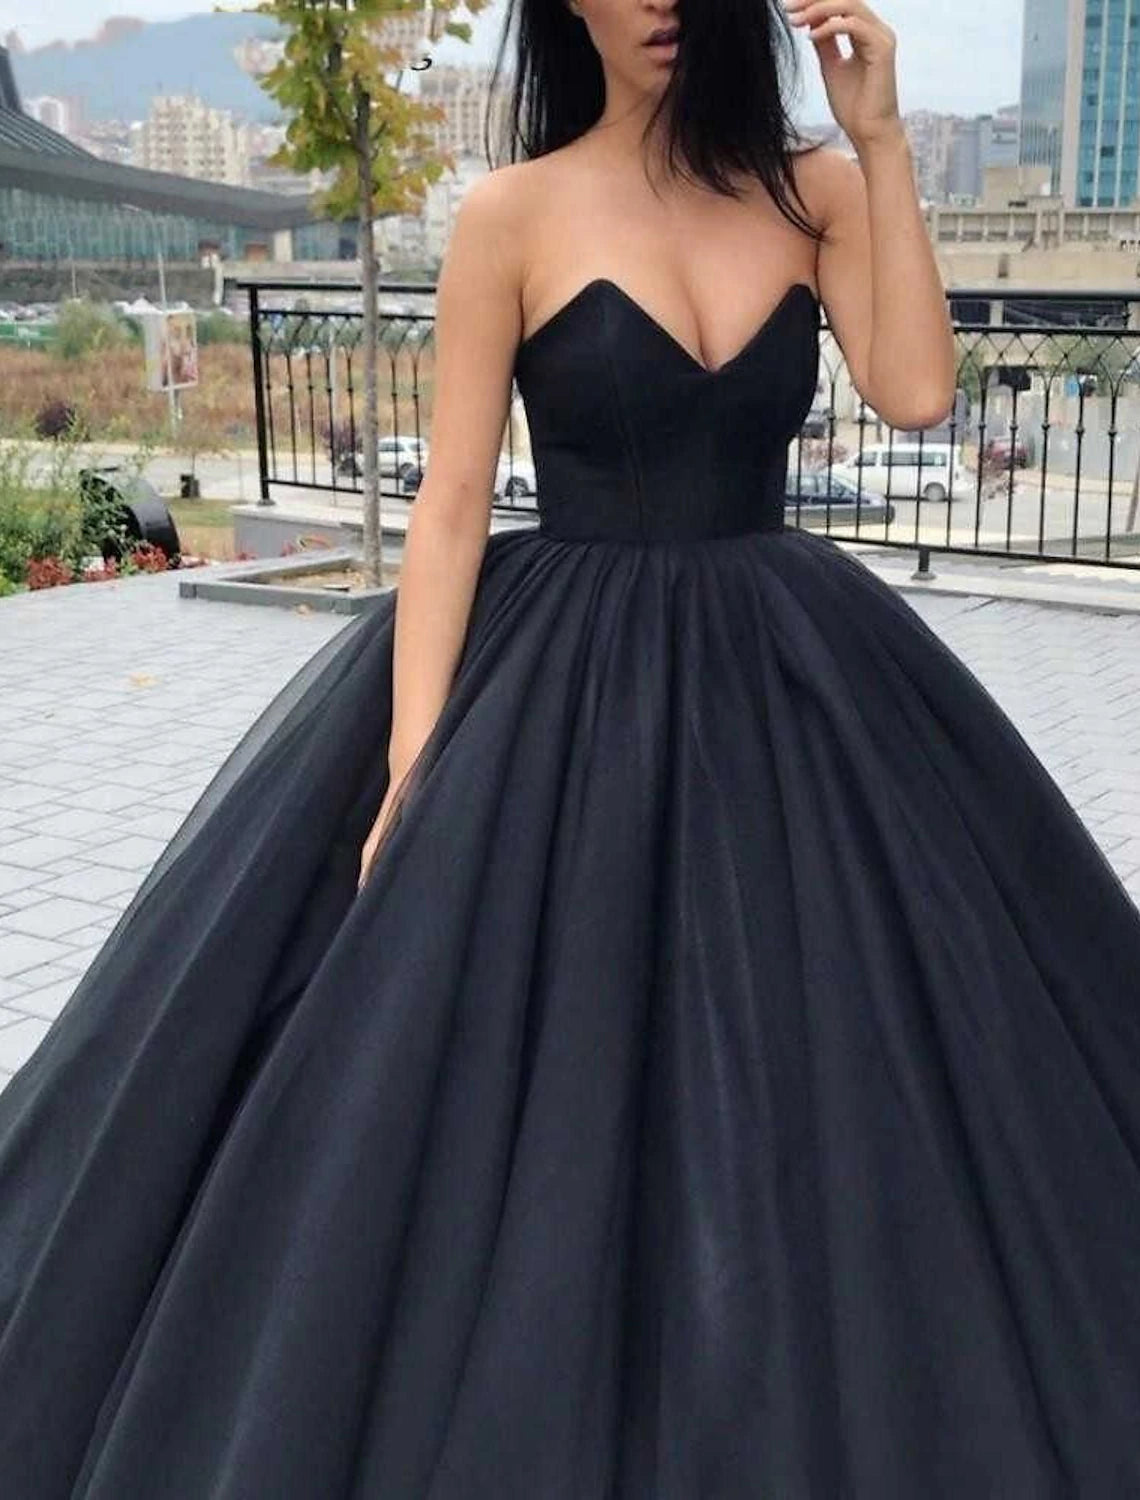 Black Wedding Dresses Formal Ball Gown Sweetheart Strapless Floor Length Satin Engagement Gothic Fall Halloween Bridal Gowns With Draping